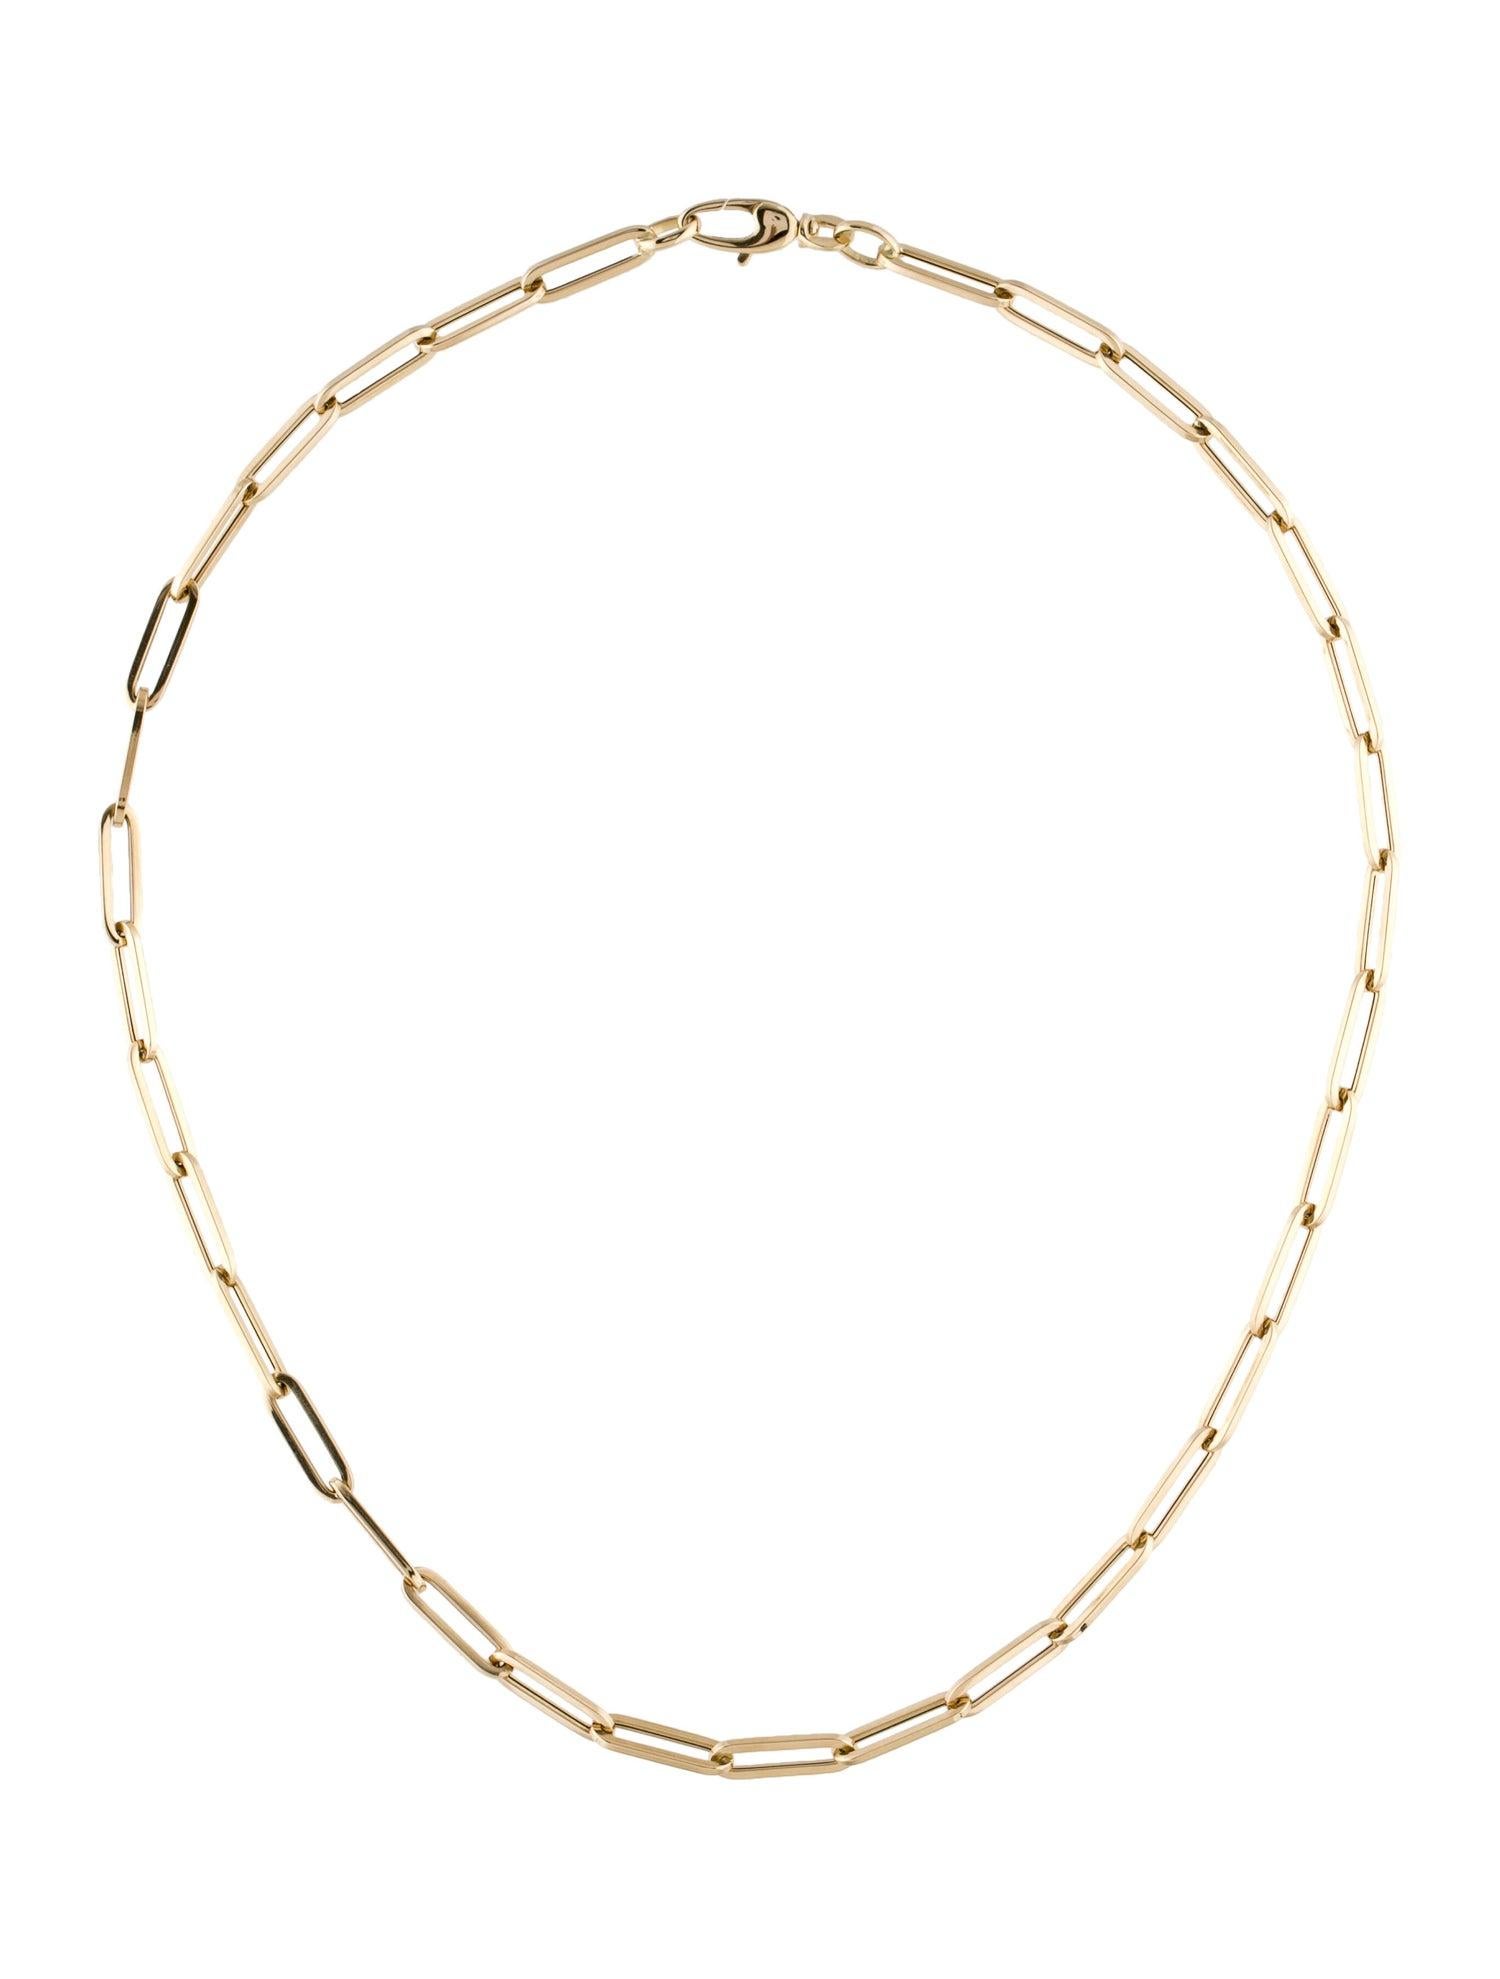 14 Karat Yellow Gold Paper Clip Link Chain Necklace, Made in Italy For Sale 2